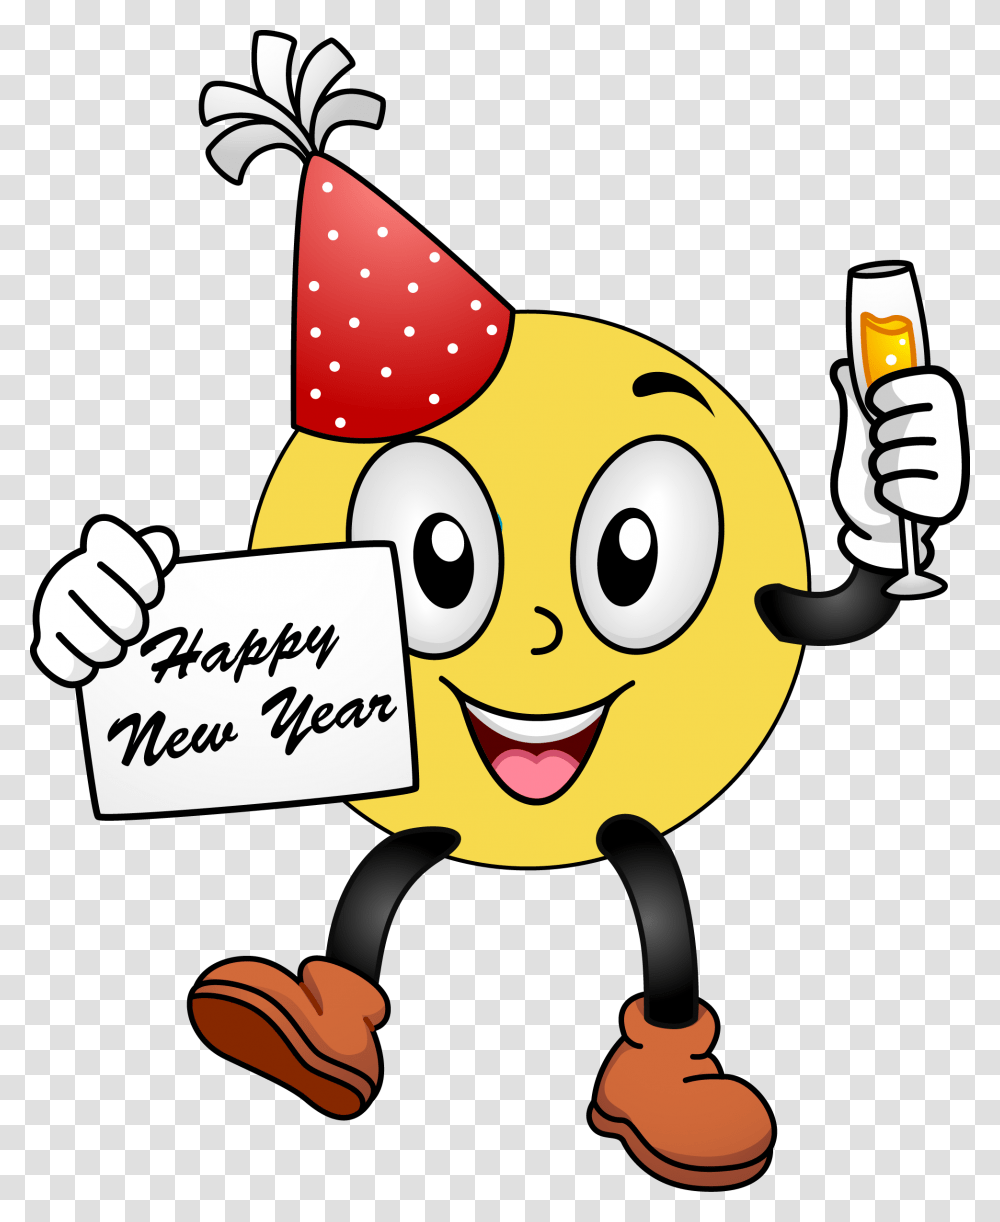 Happy New Year 2019 Smiley Transparent Png